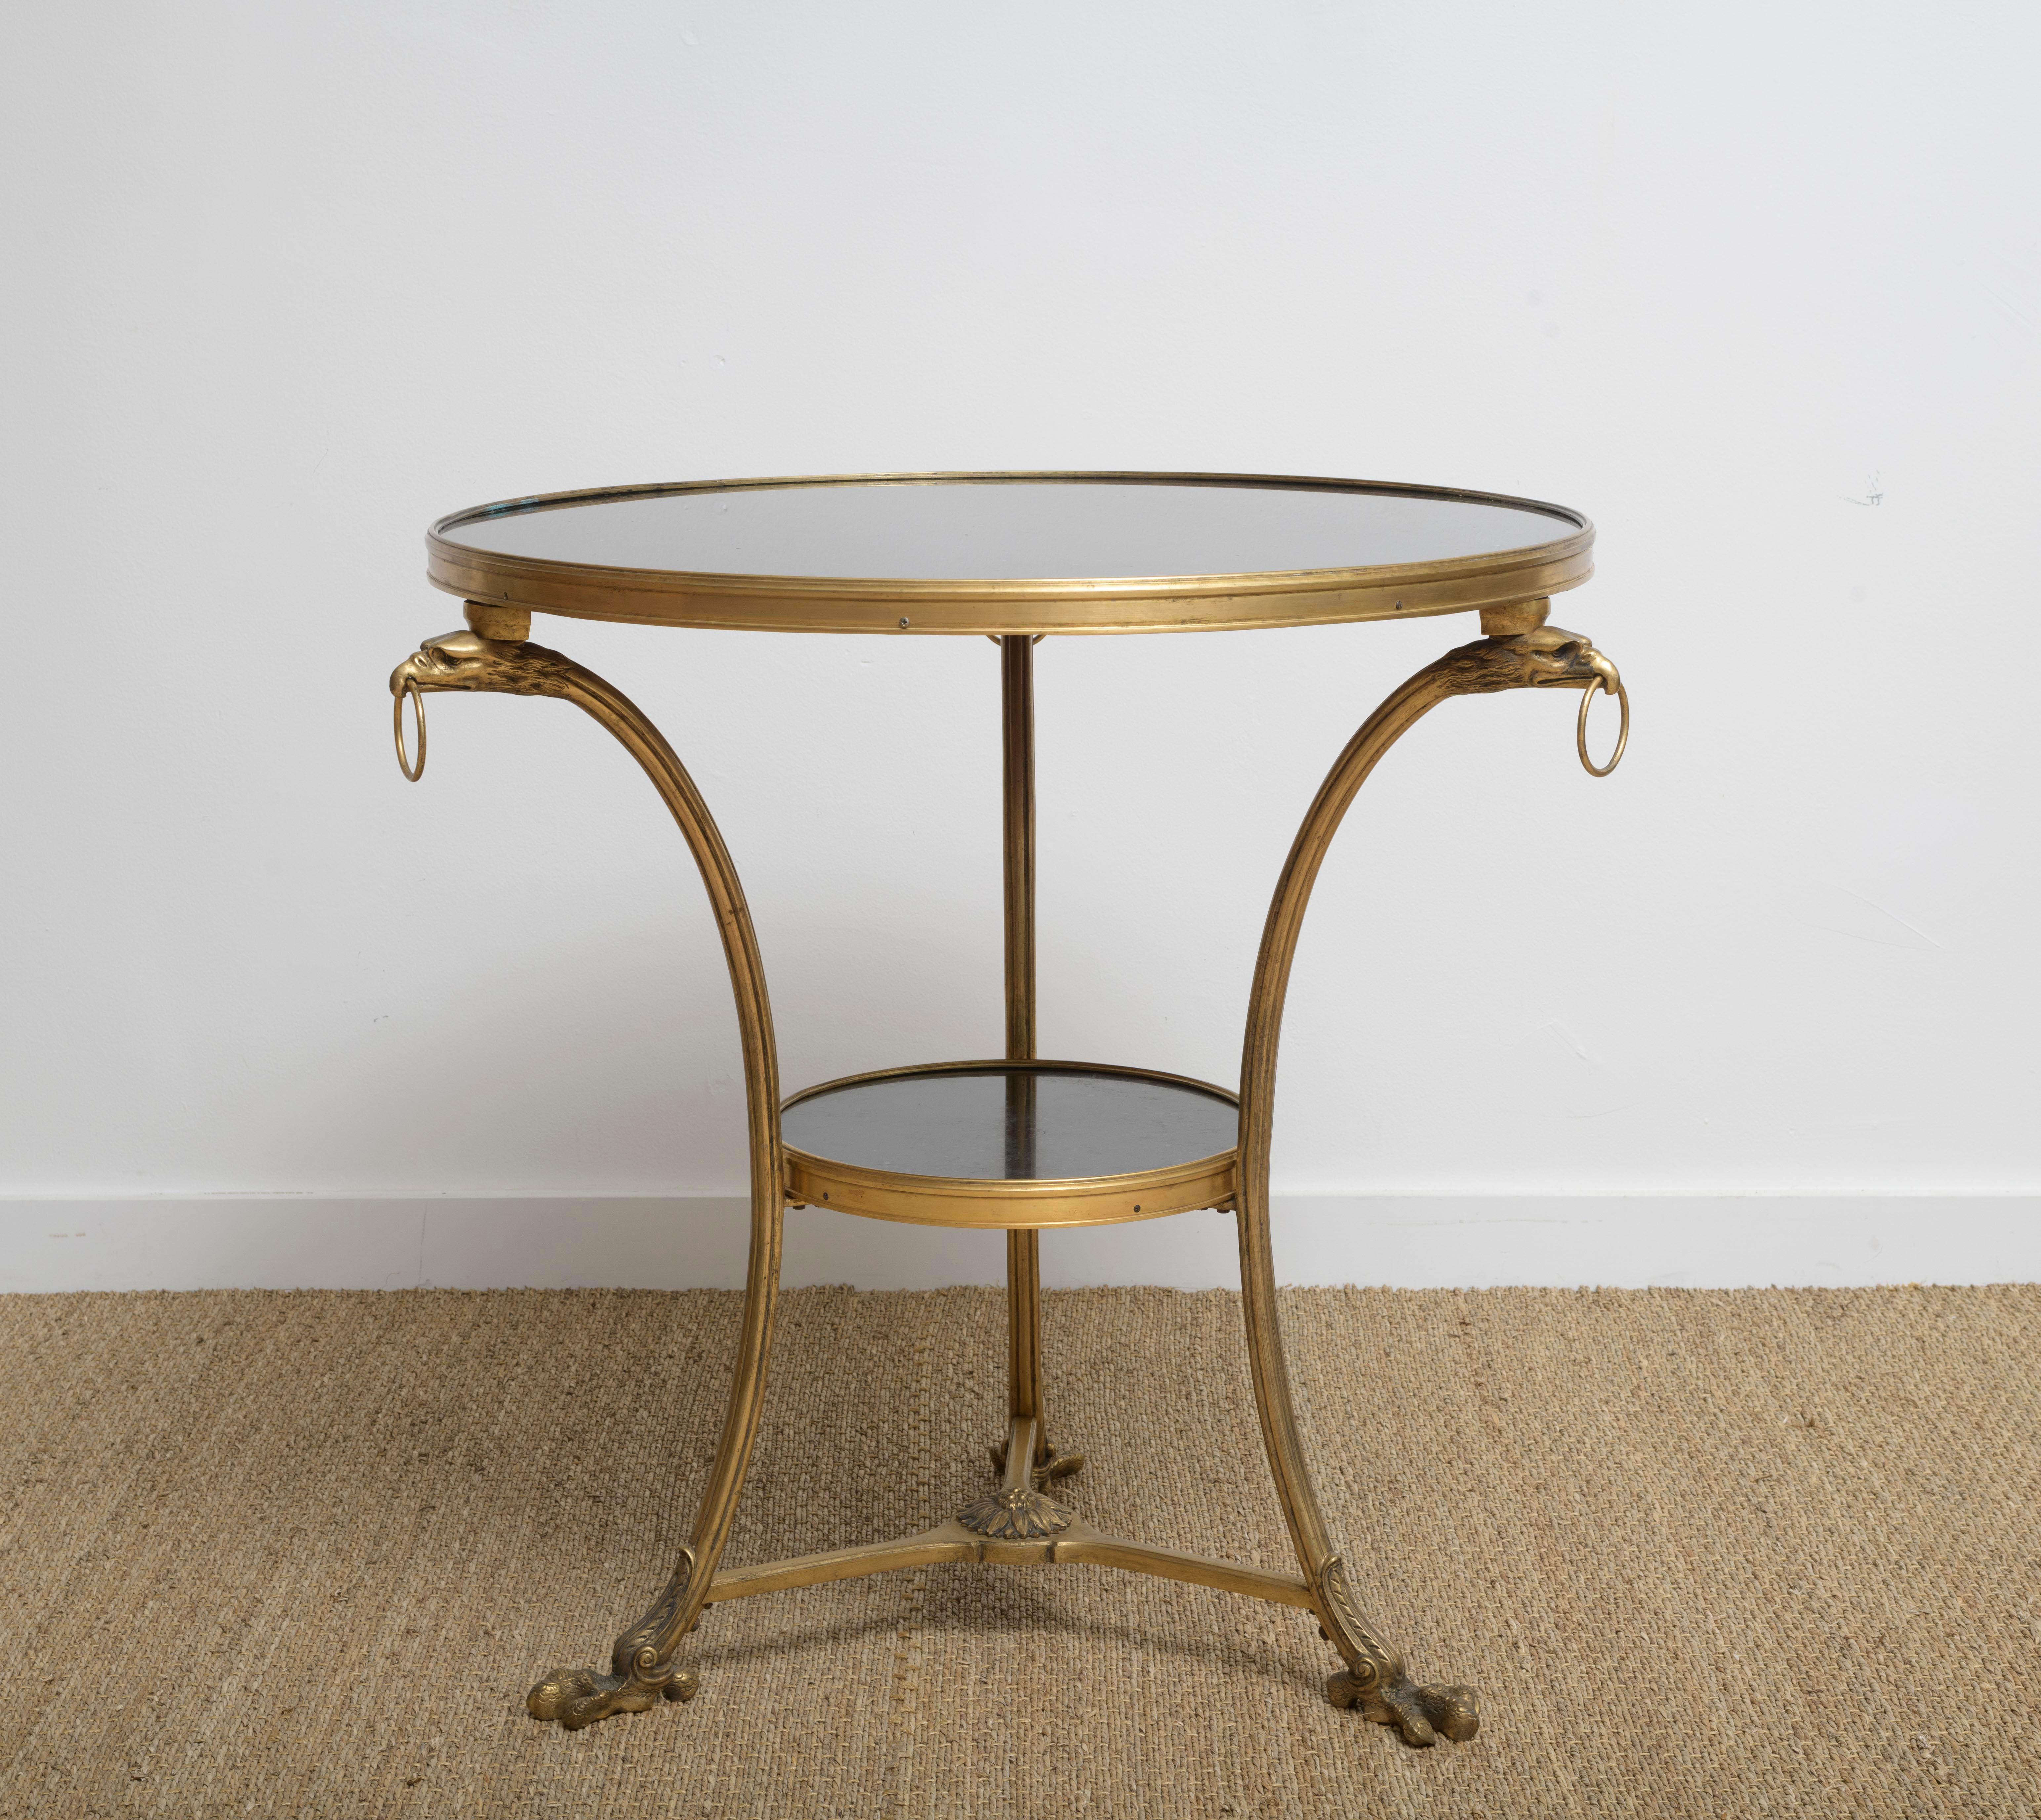 Antique French Brass & Black Marble Round Gueridon Table in the Empire Taste with Eagle Ring Handles and Talon Feet, late 19th century 